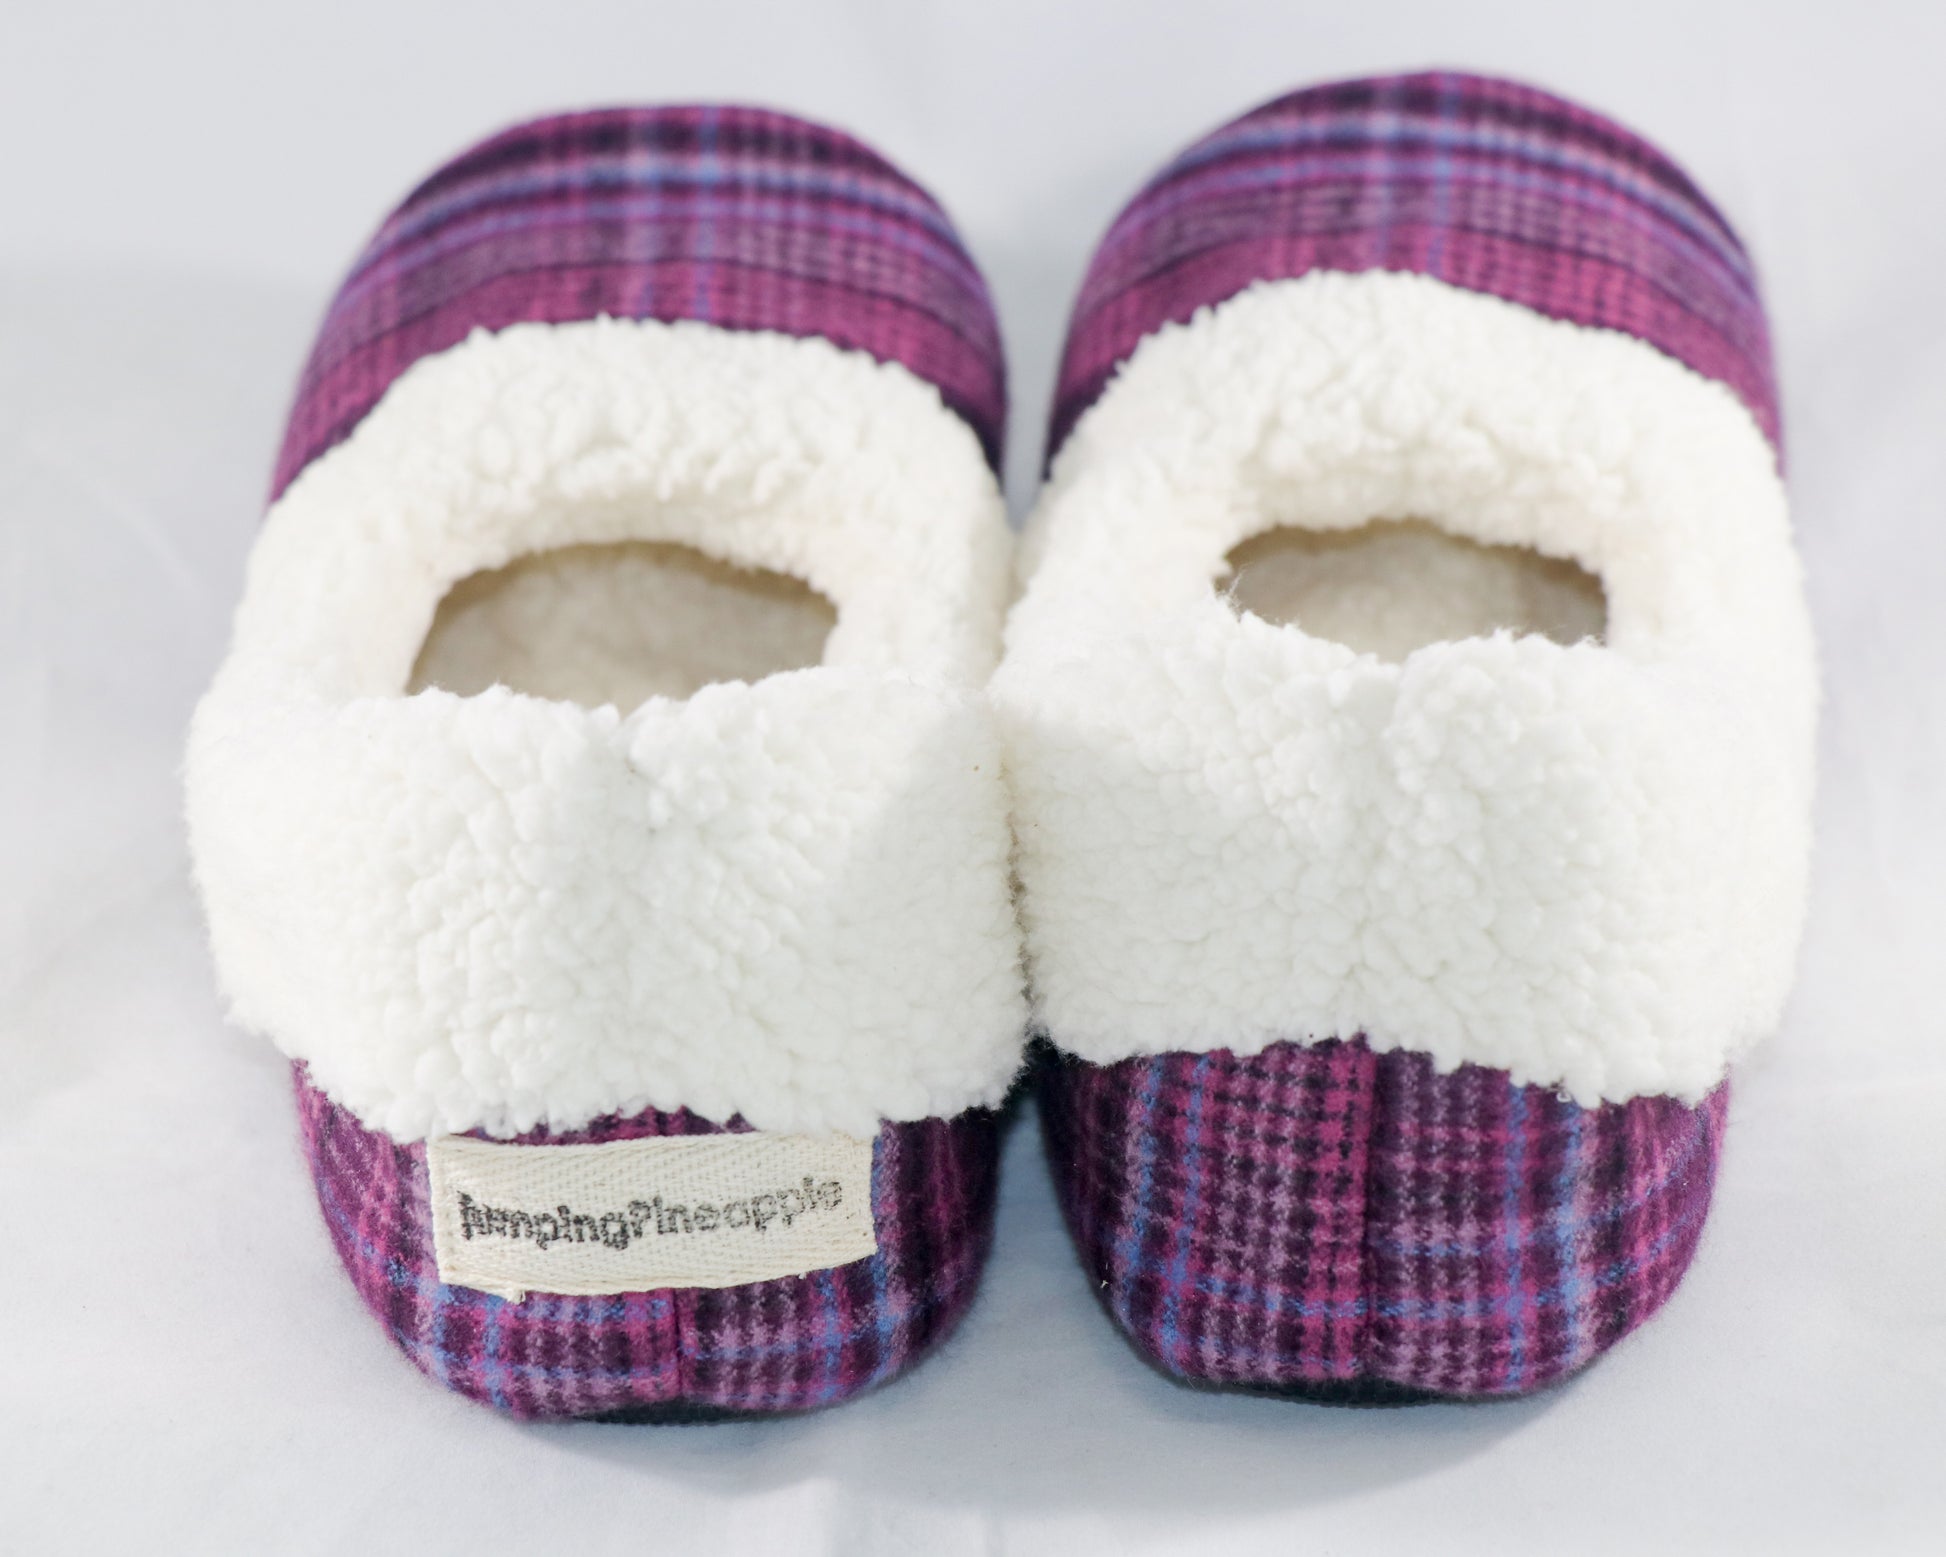 back view of magenta plaid flannel slippers with sherpa lining